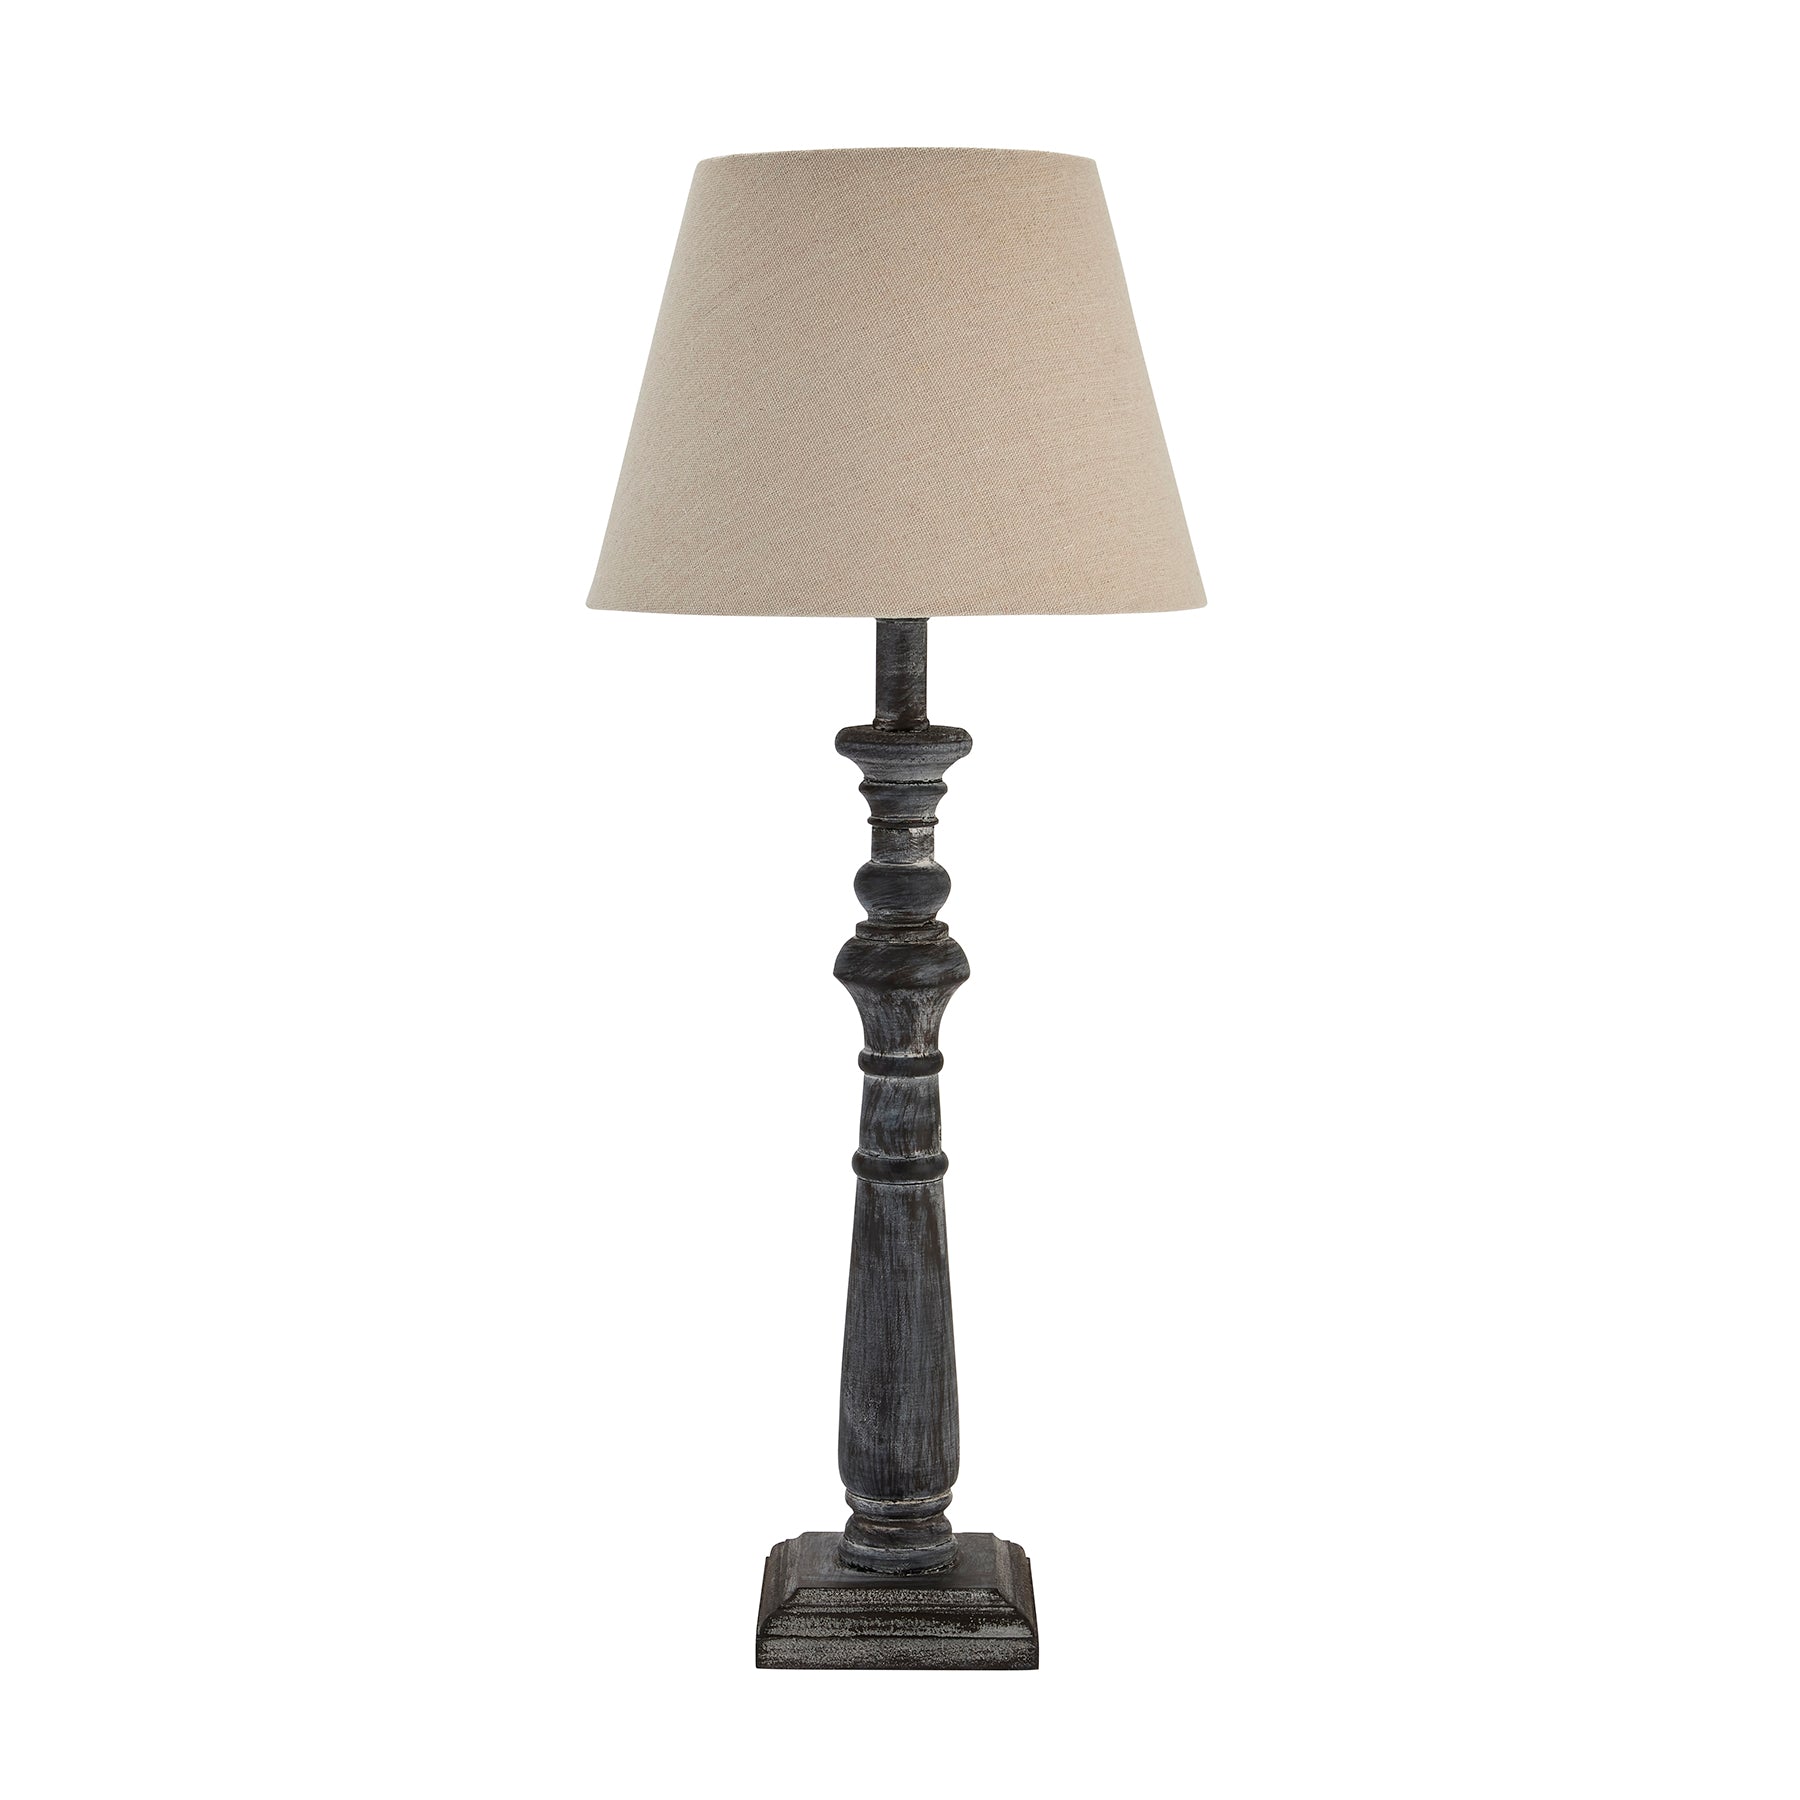 View Incia Column Table Lamp information